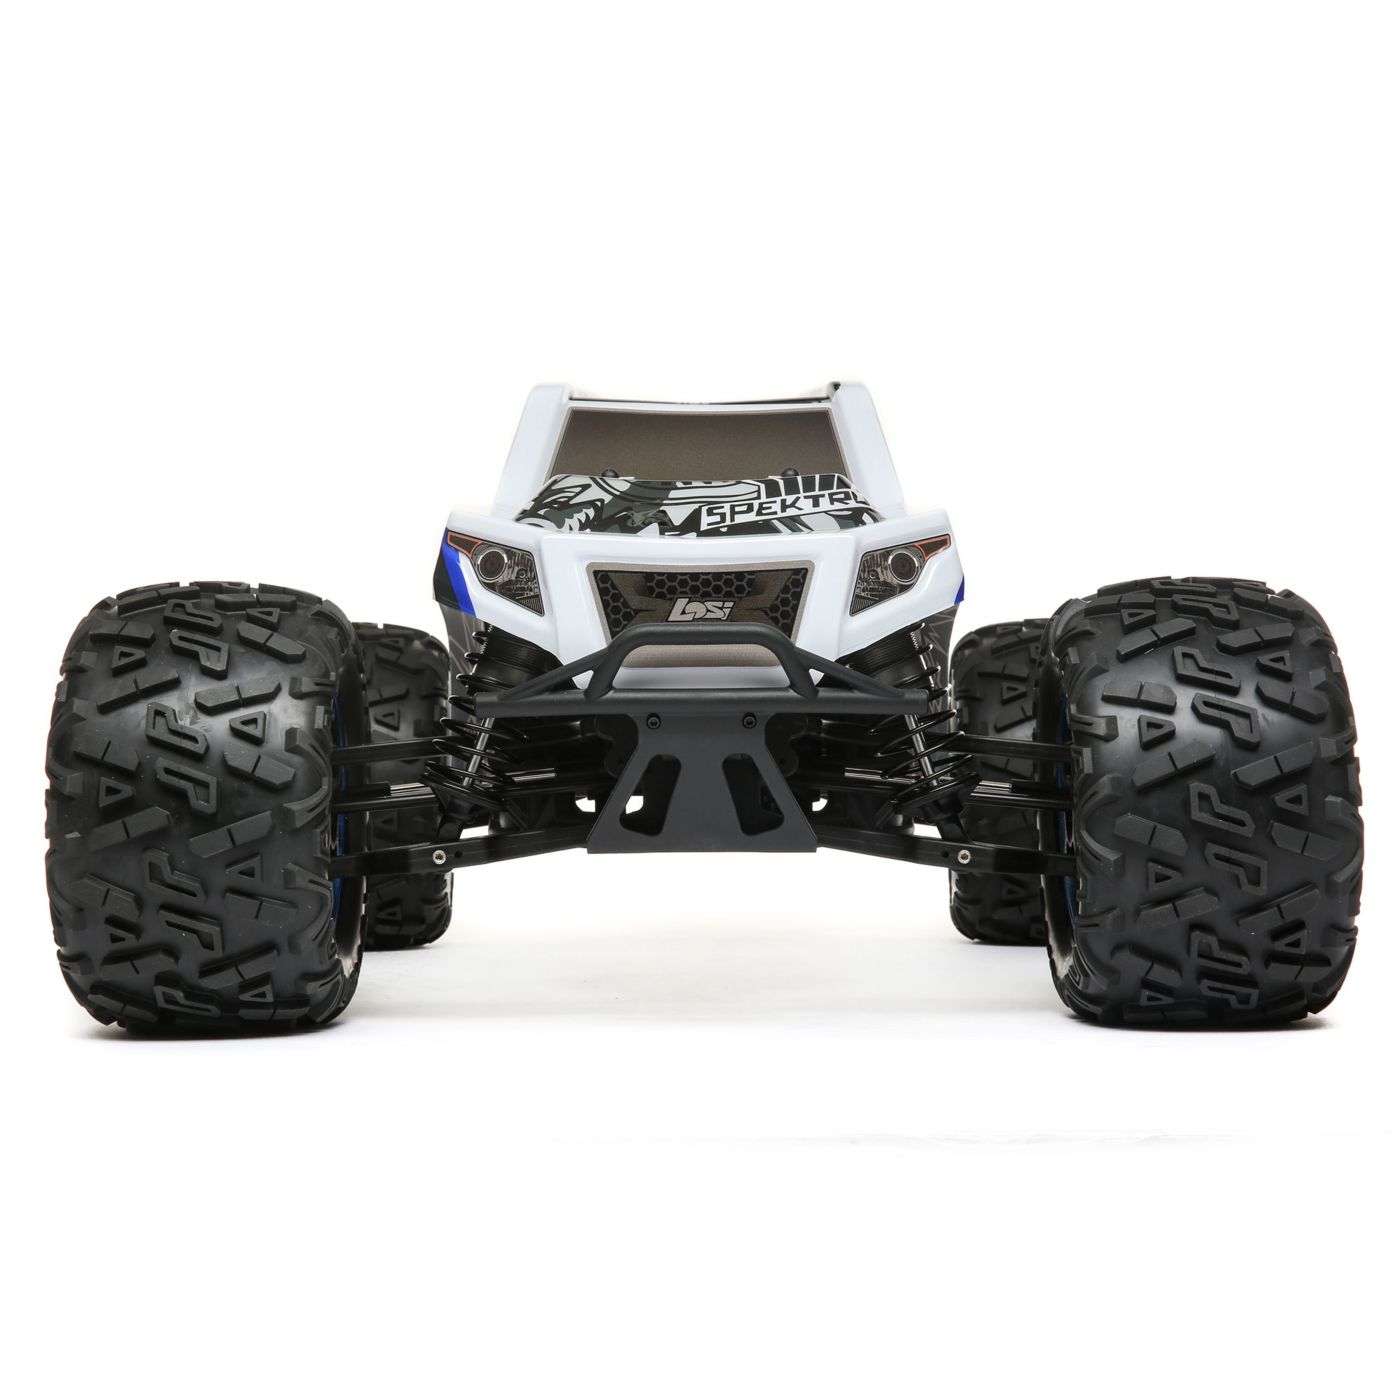 Losi LST 3XL-E RC Monster Truck - Front